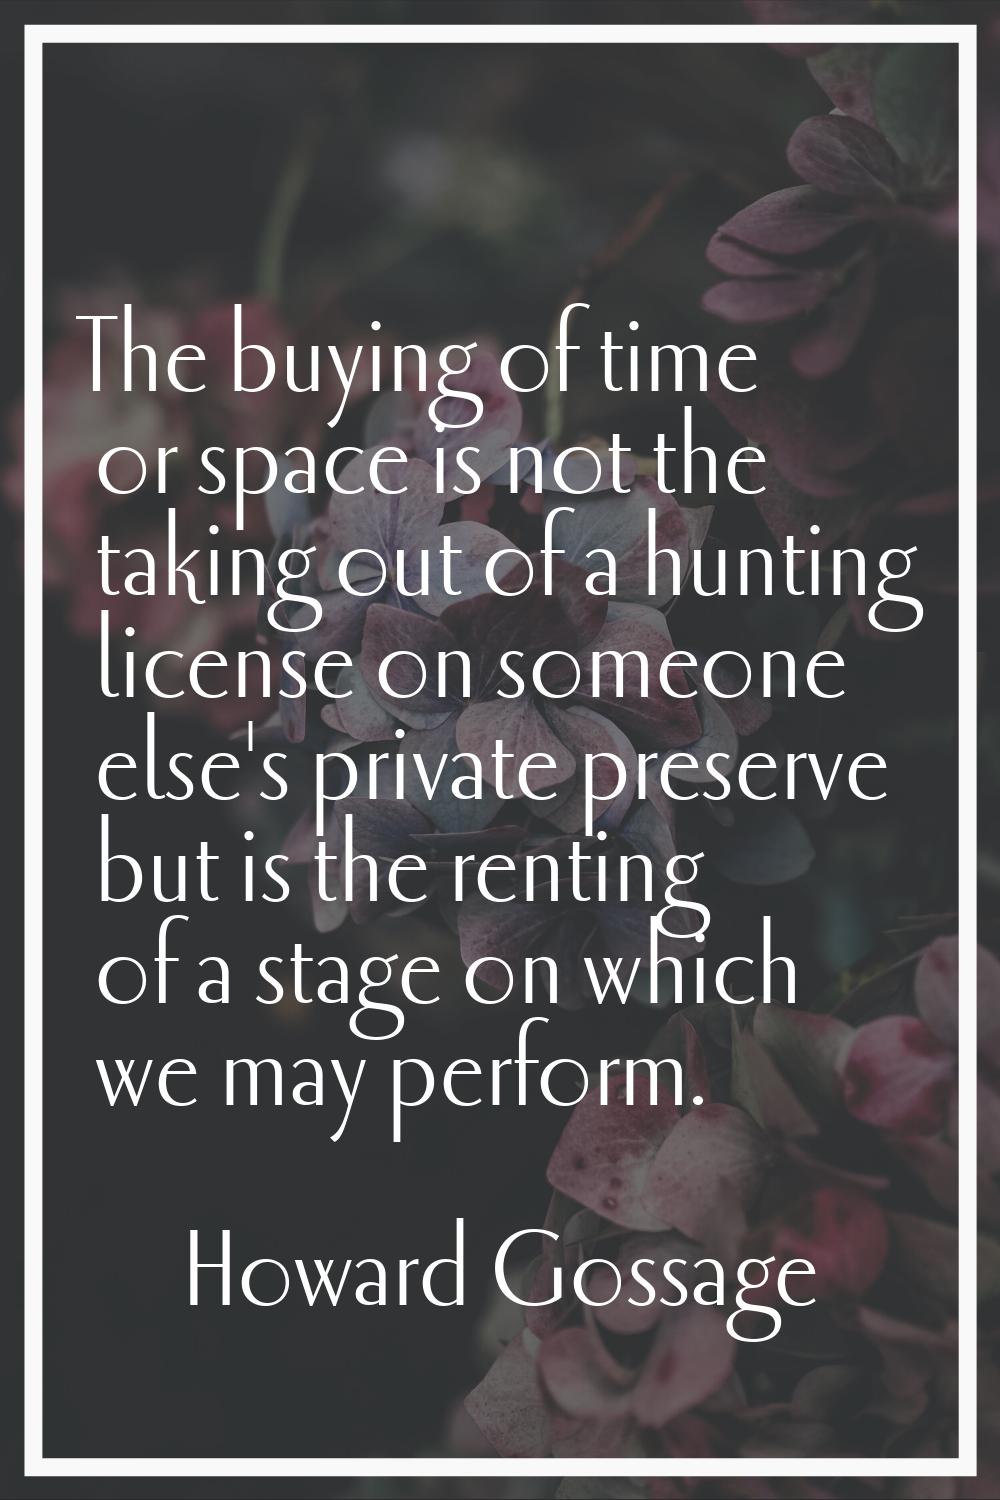 The buying of time or space is not the taking out of a hunting license on someone else's private pr